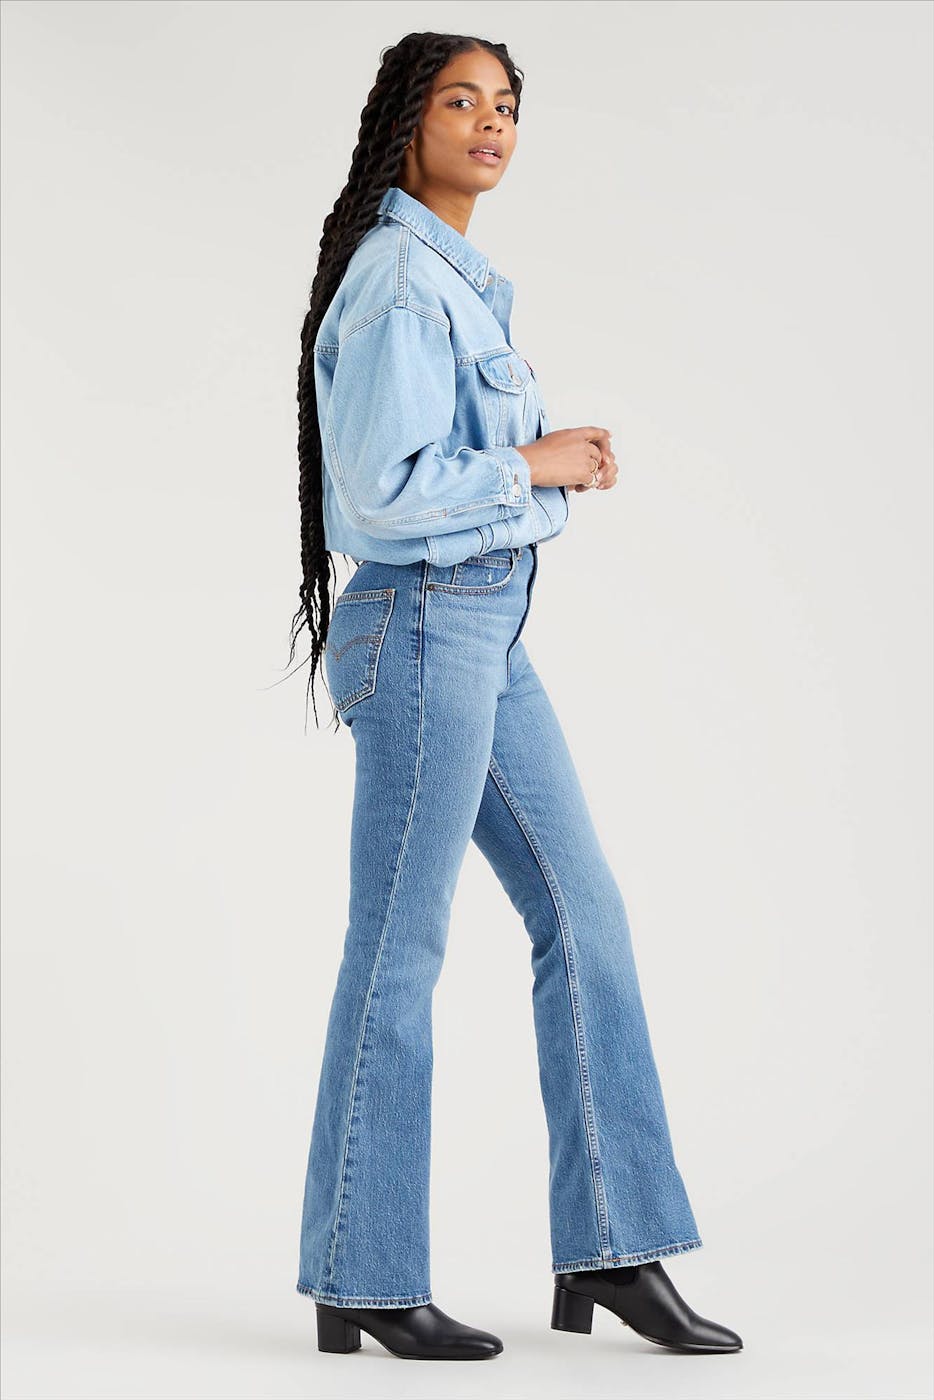 Levi's - Blauwe 70s High Flare jeans